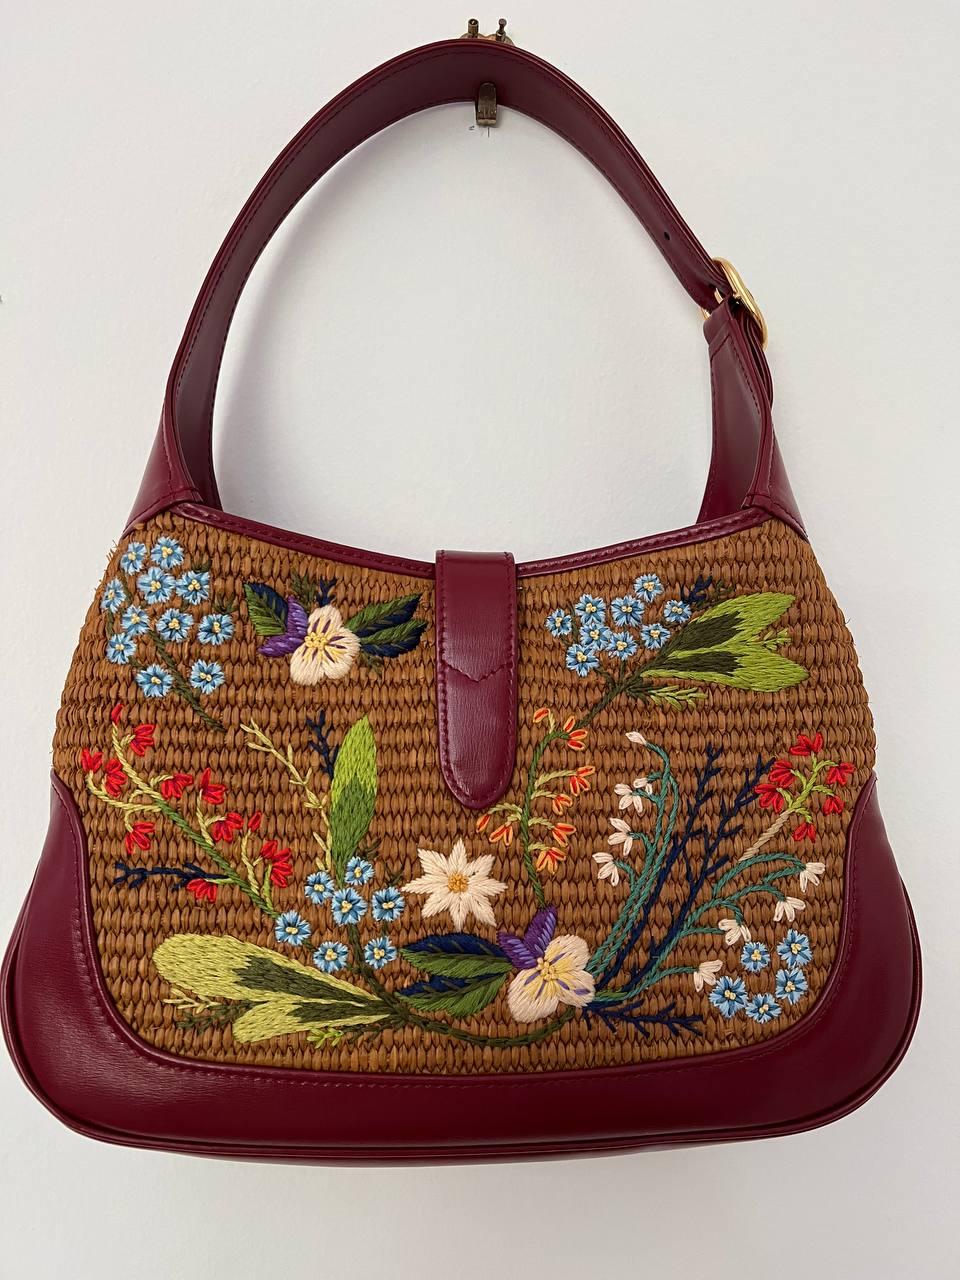 Iconic Jackie bag in small size with flower embroidery.
Limited edition.
Adjustable Shoulder Strap.
Canvas Lining & Single Interior Pocket
Measurements:
Shoulder Strap Length: 20.5″
Shoulder strap drop: 20.5″
Height: 7.5″
Width: 11″
Depth: